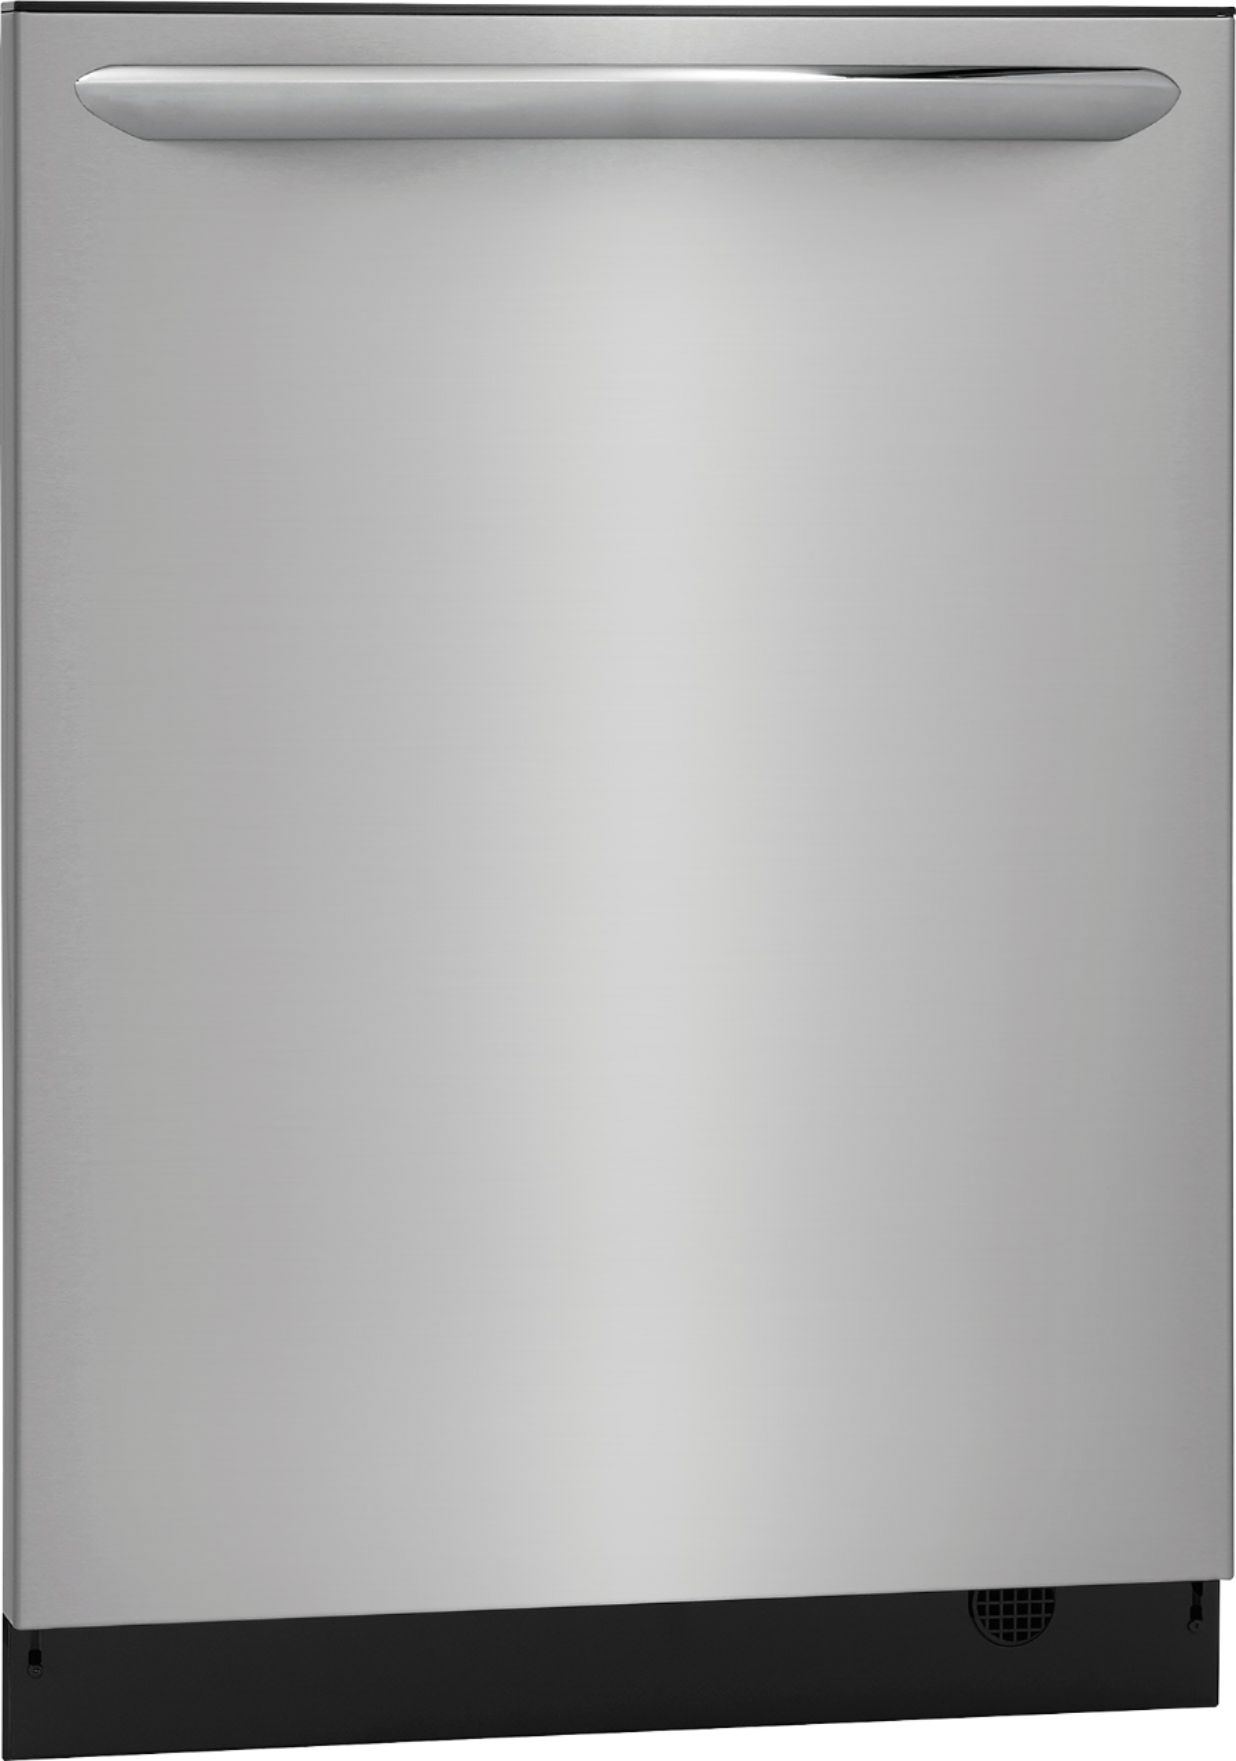 Angle View: Whirlpool - 24" Built-In Dishwasher - White